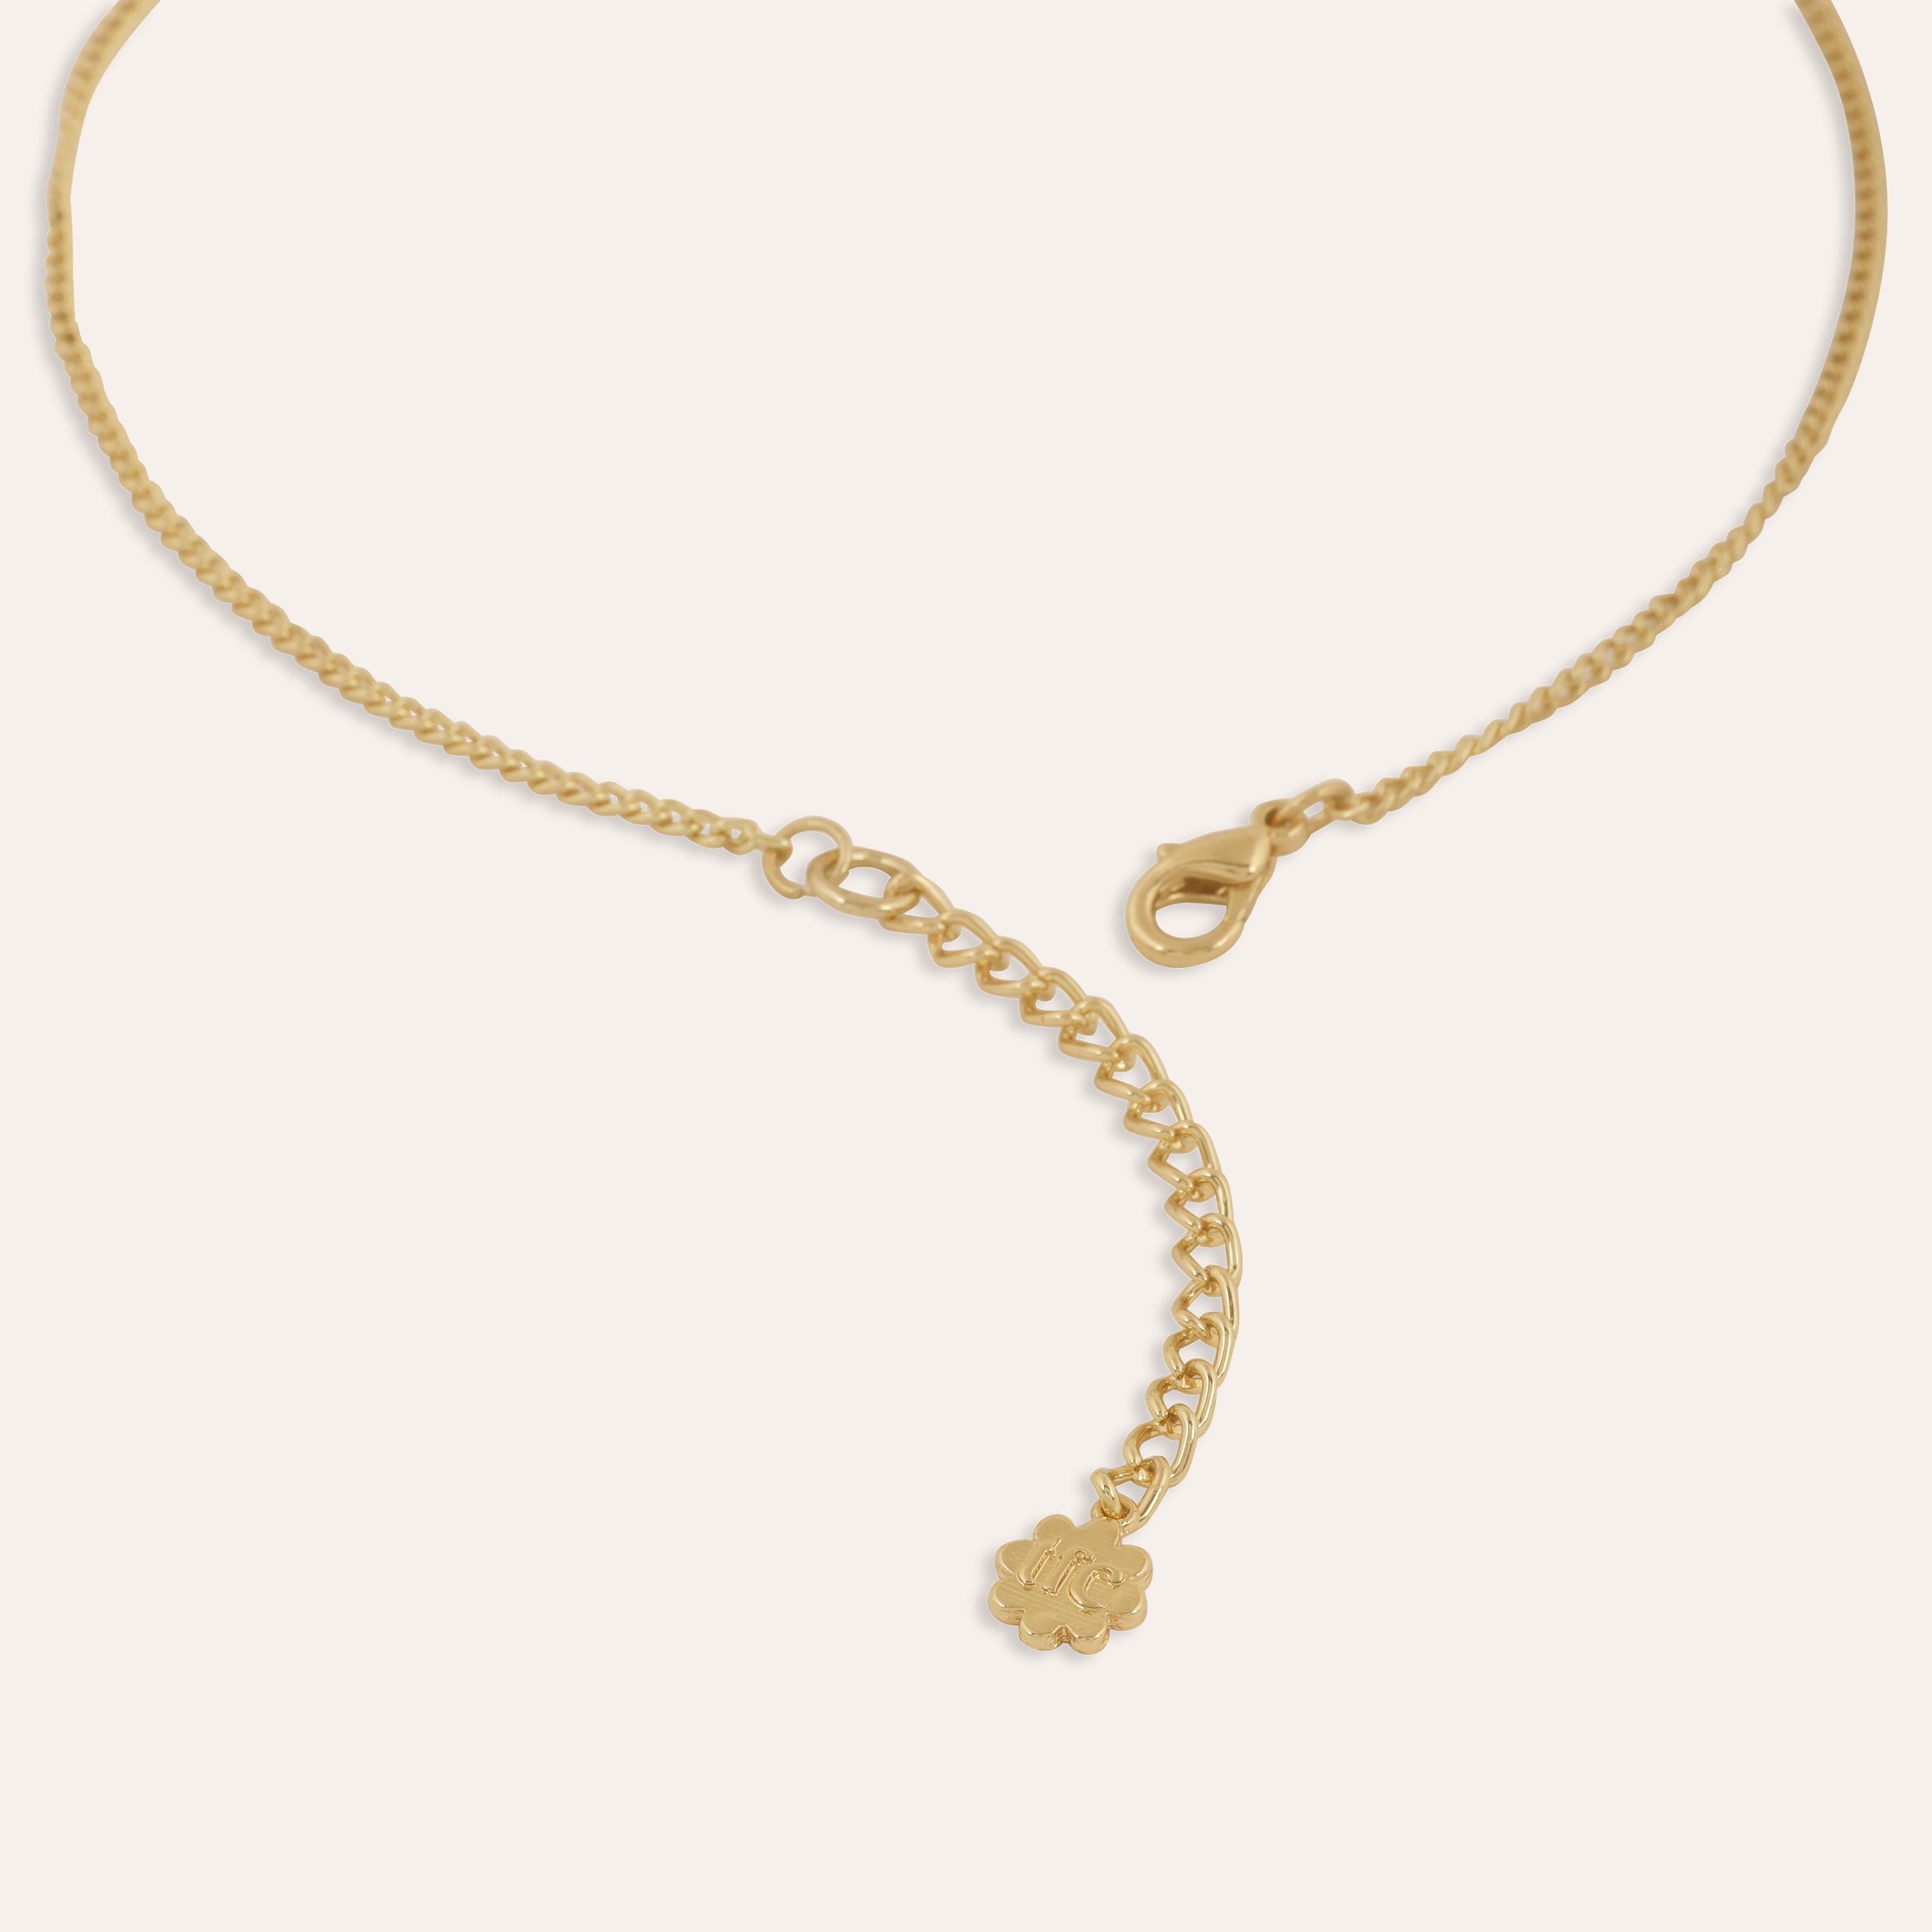 TFC Ballerina Gold Plated Pendant Necklace-Enhance your elegance with our collection of gold-plated necklaces for women. Choose from stunning pendant necklaces, chic choker necklaces, and trendy layered necklaces. Our sleek and dainty designs are both affordable and anti-tarnish, ensuring lasting beauty. Enjoy the cheapest fashion jewellery, lightweight and stylish- only at The Fun Company